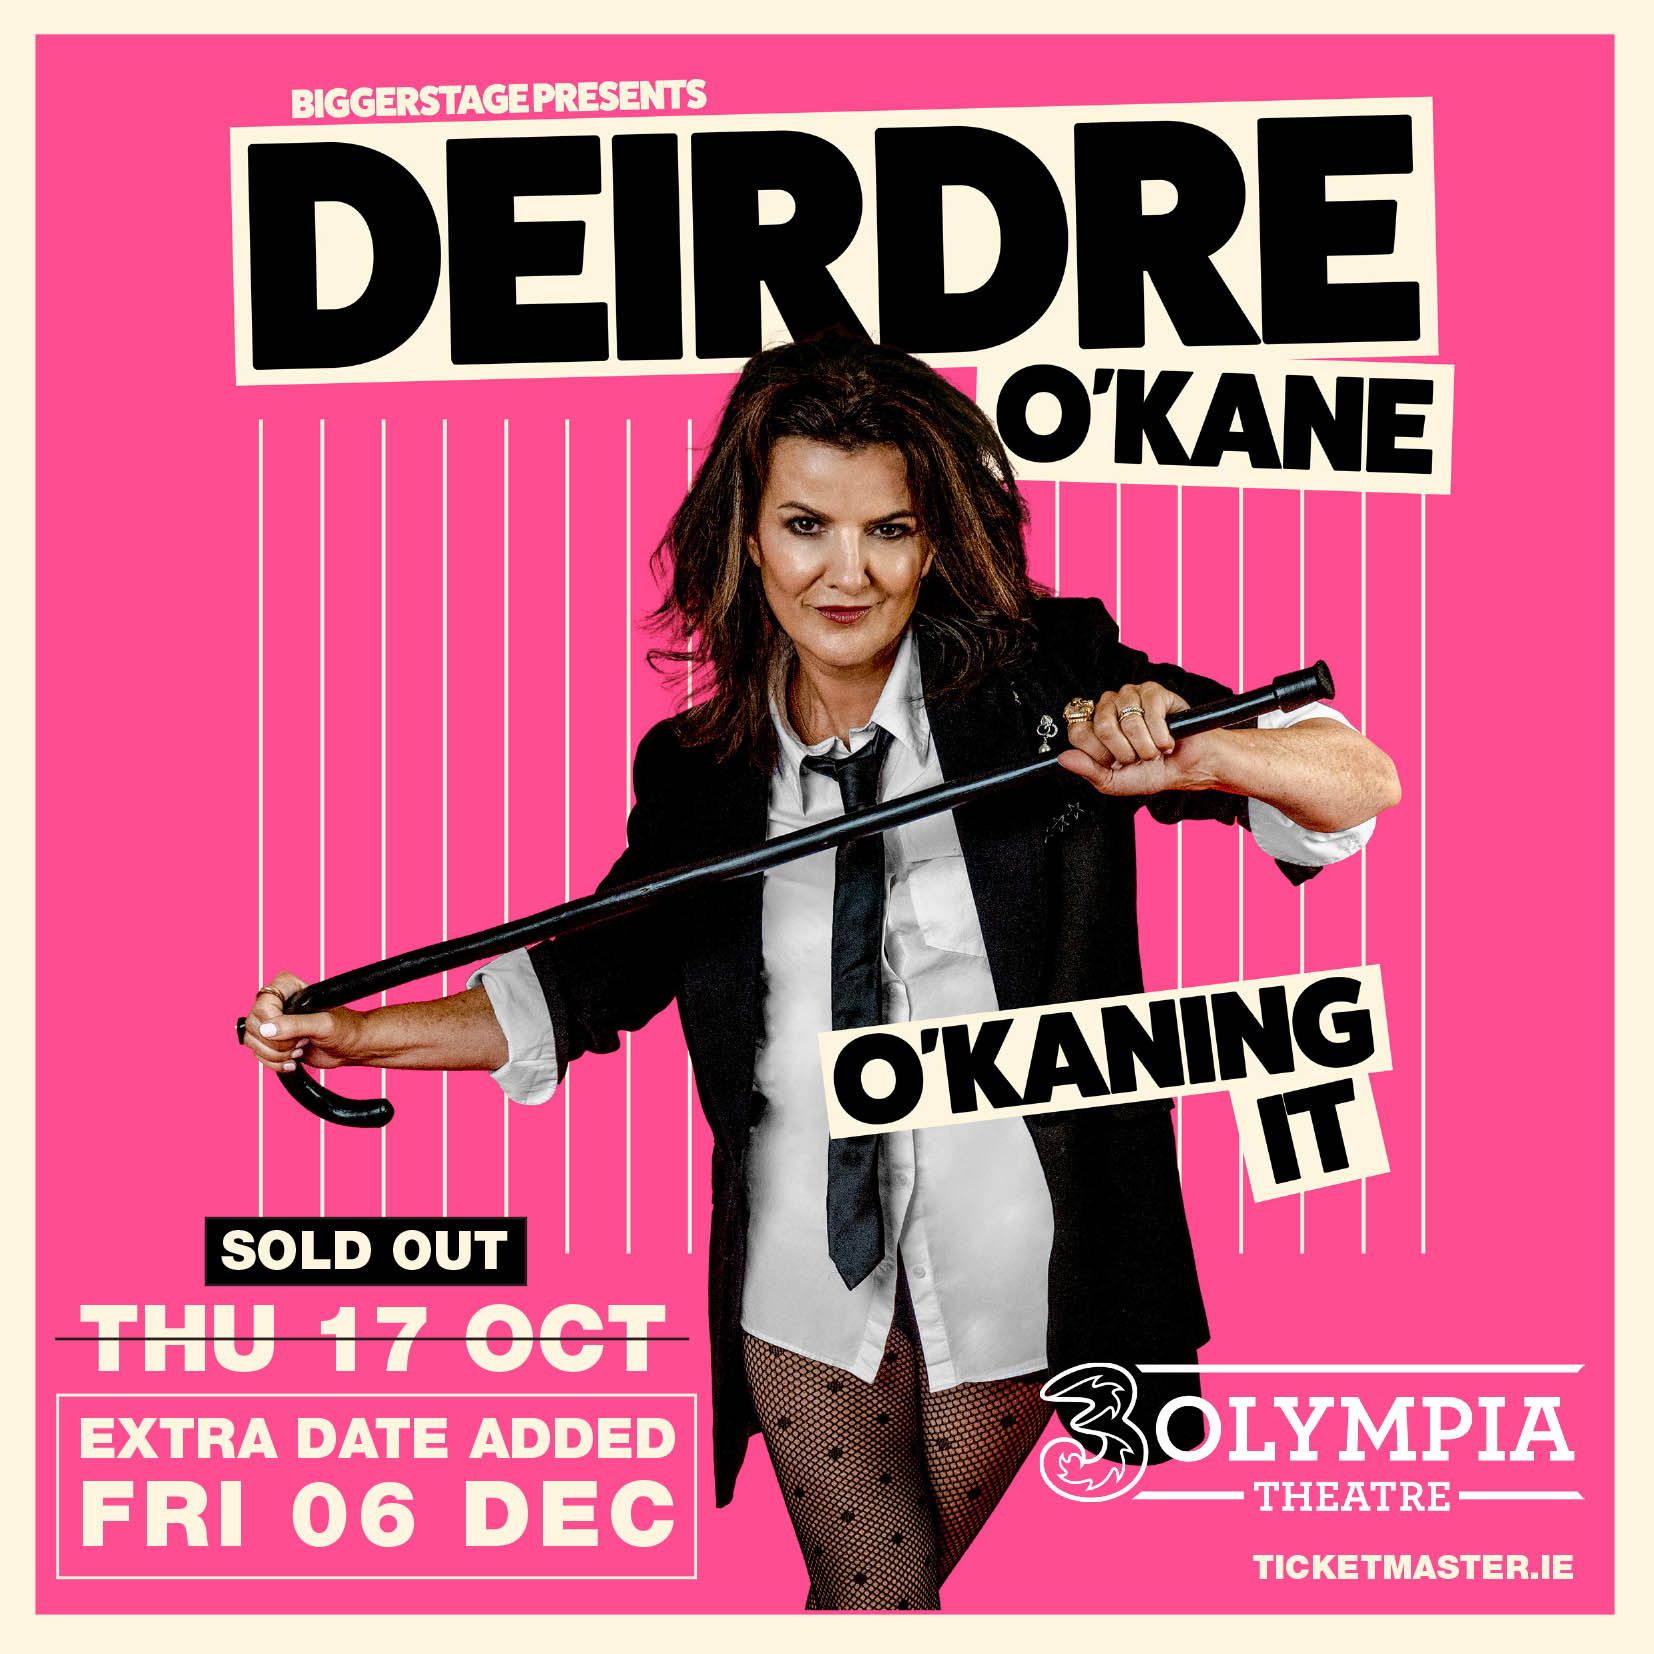 DEIRDRE O’KANE
BRAND NEW STAND-UP SHOW O’KANING IT
EXTRA DATE AT 3OLYMPIA THEATRE CONFIRMED
